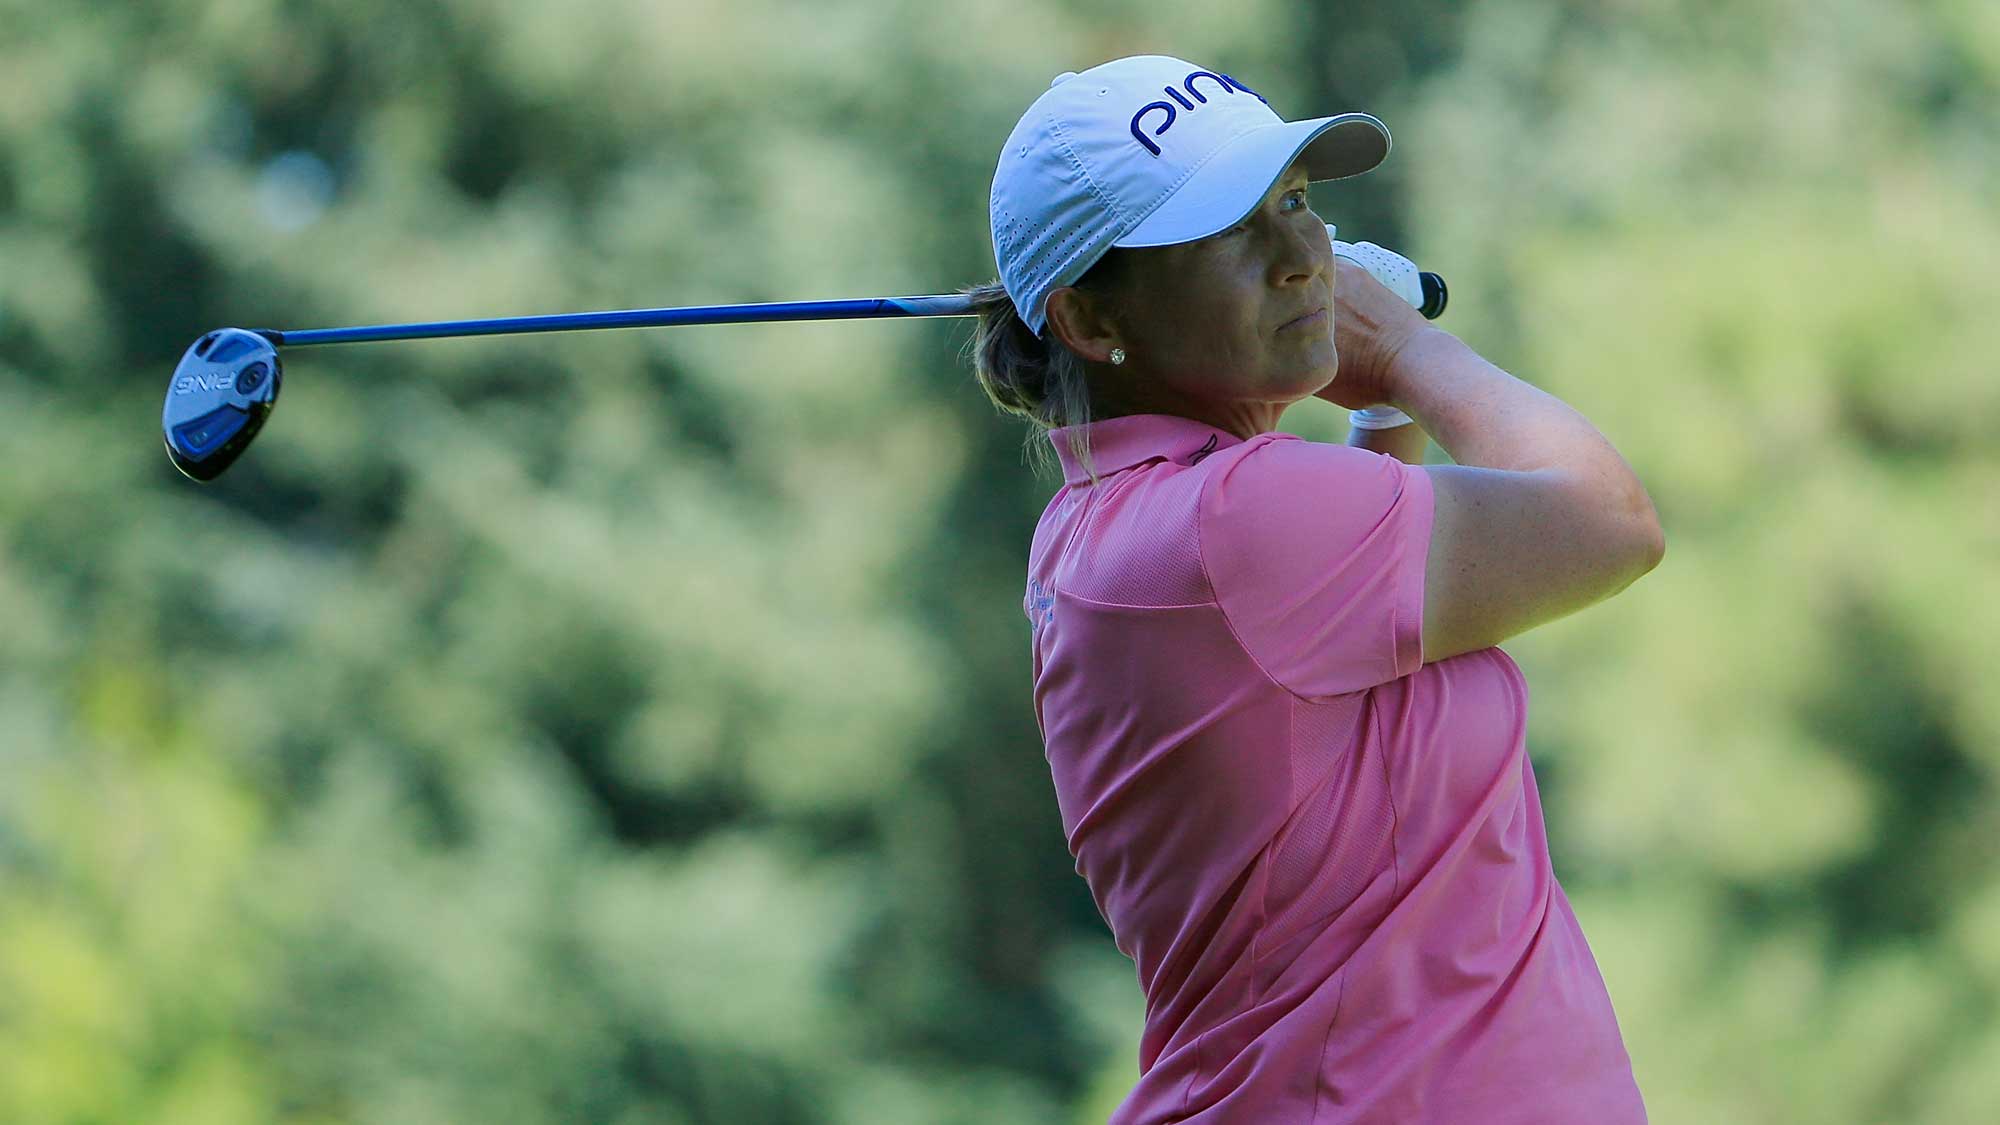 Angela Stanford hits her drive on the 11th hole during the first round of the Cambia Portland Classic